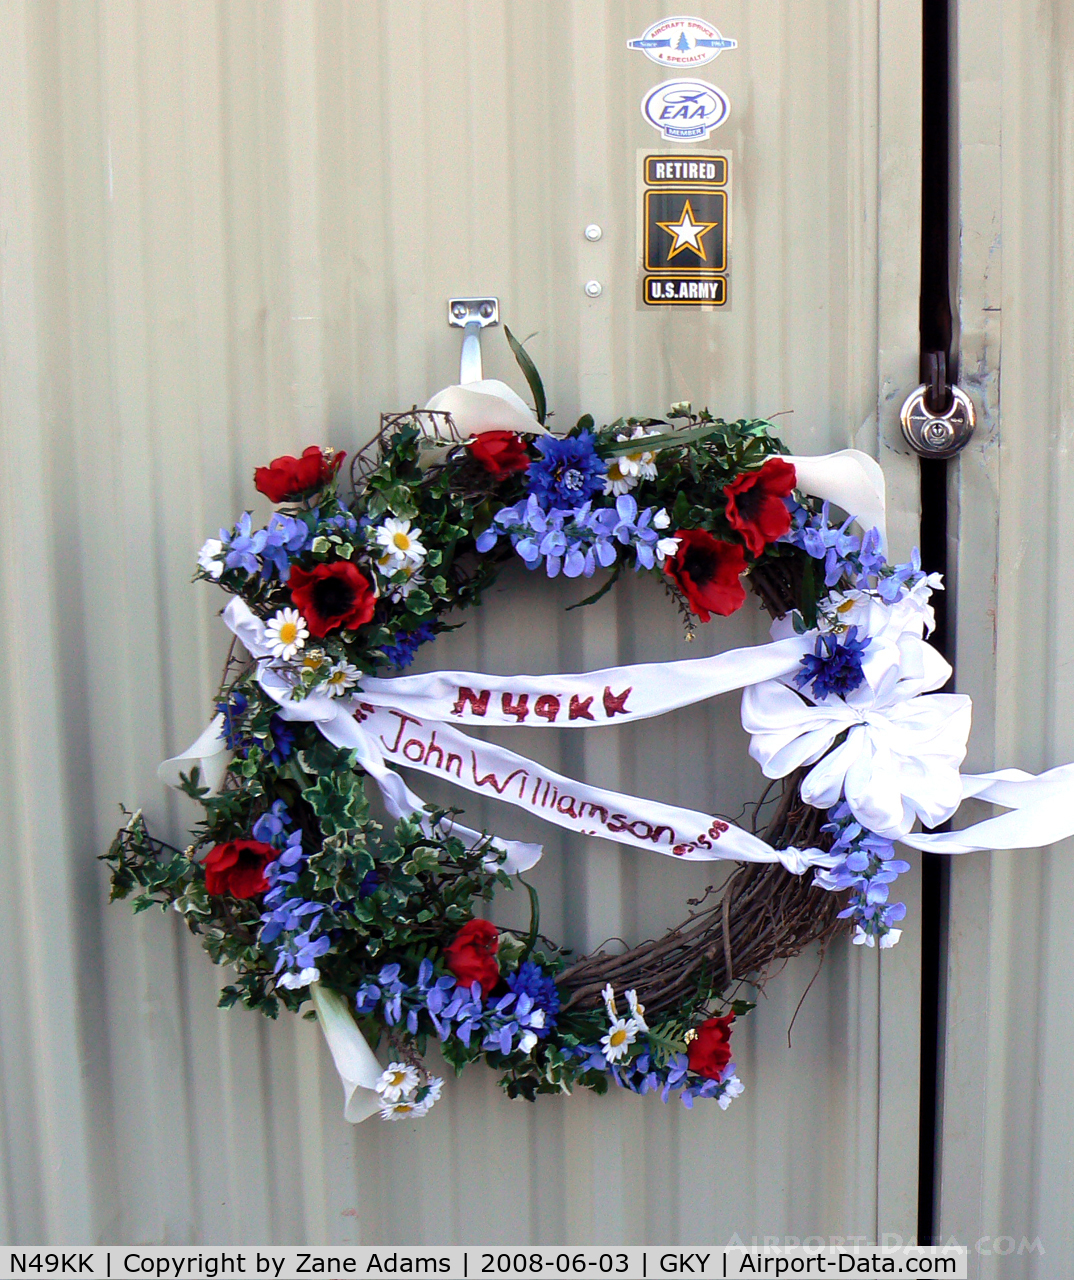 N49KK, 2002 Kolb Kolbra C/N KB01-3-00008, This wreath and a note were attached to the hanger door where N49kk has been stored for many years...Quite a shock. I did not know the man but I had spoken with him on several occasions and was always fascinated by his airplane. God rest his soul.